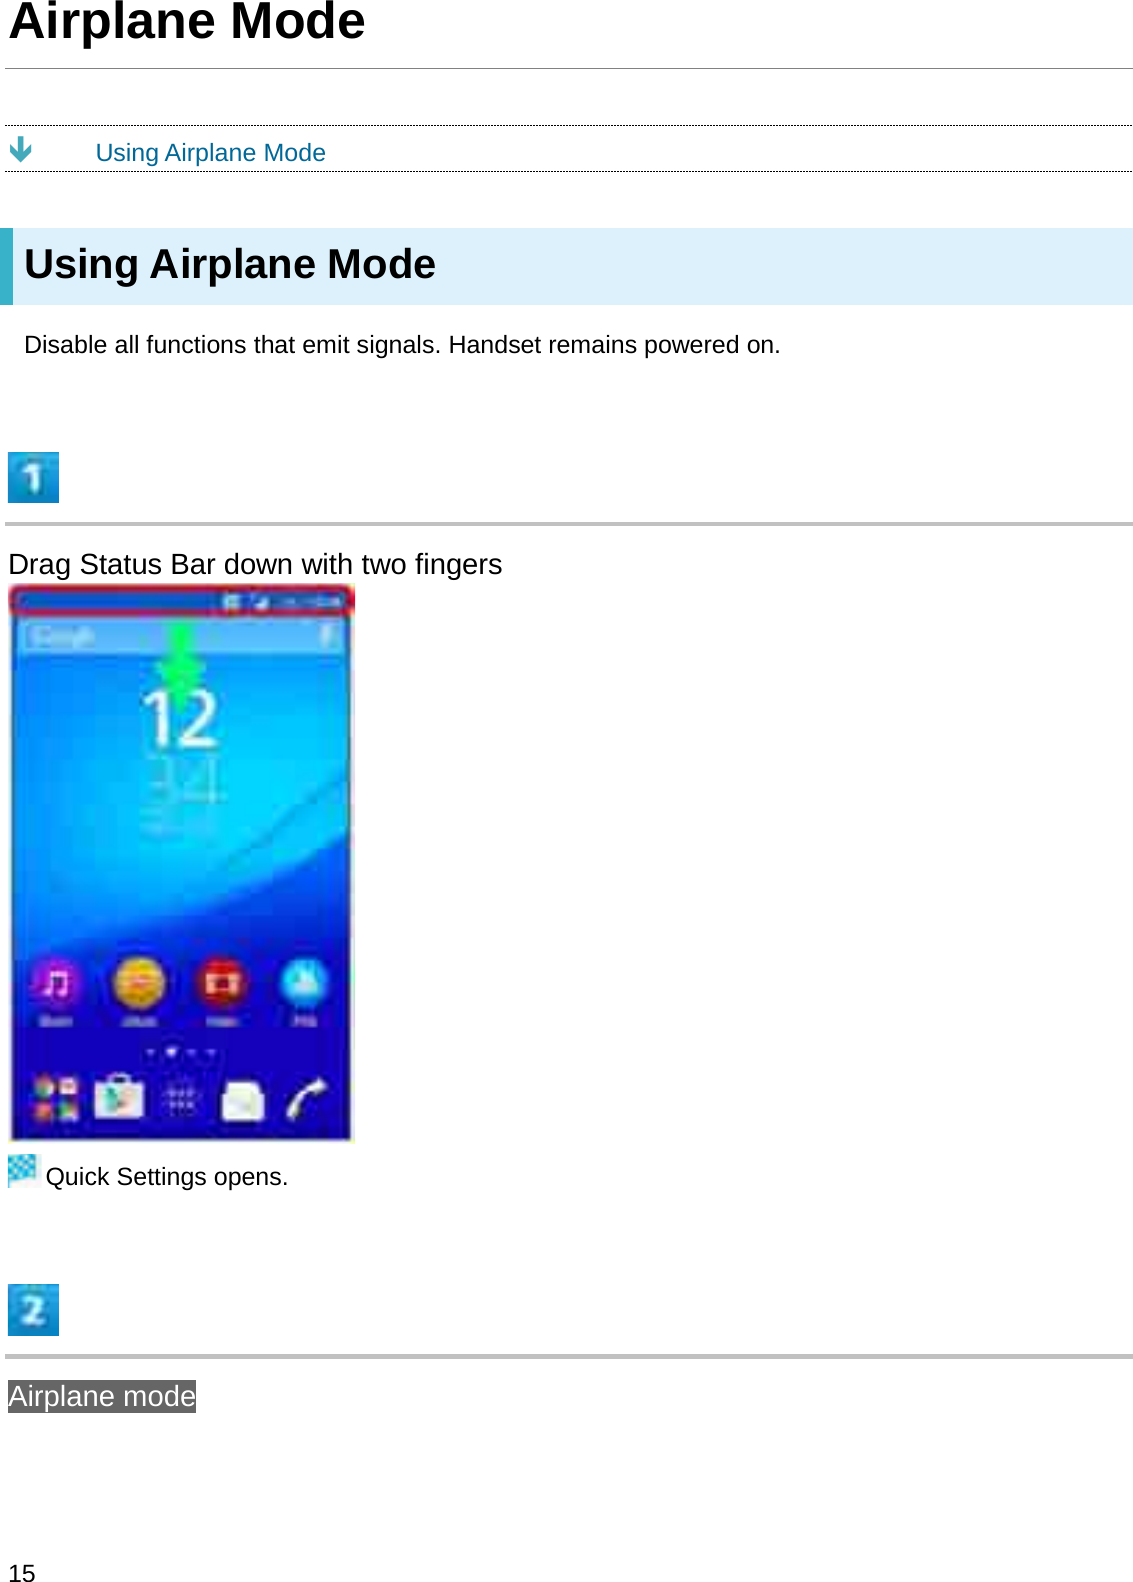 Airplane ModeÐUsing Airplane ModeUsing Airplane ModeDisable all functions that emit signals. Handset remains powered on.Drag Status Bar down with two fingersQuick Settings opens.Airplane mode15